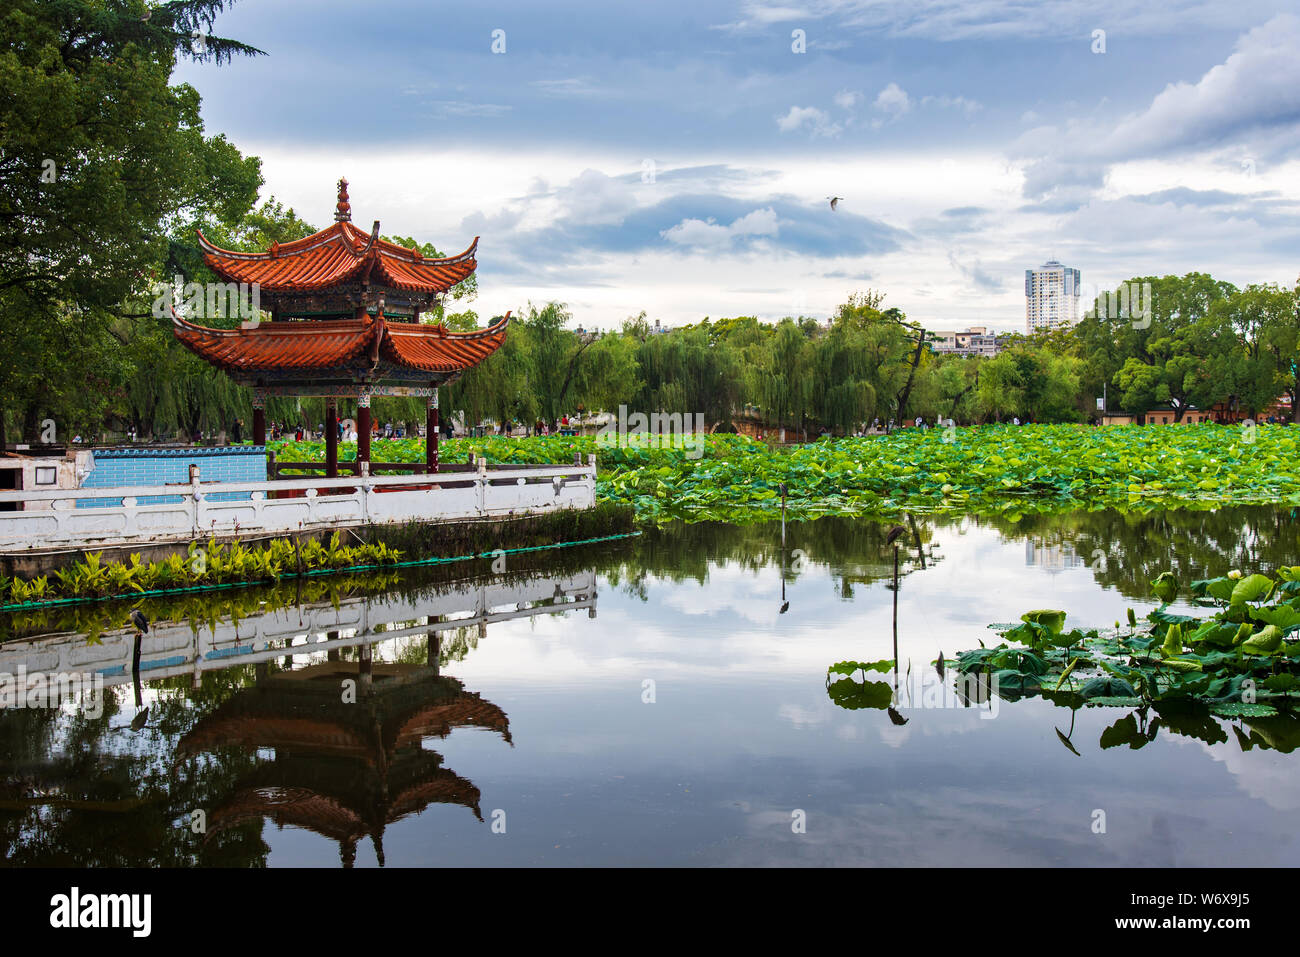 Chinese pavilion reflected in Green lake in Kunming, capital of Yunnan province of China Stock Photo